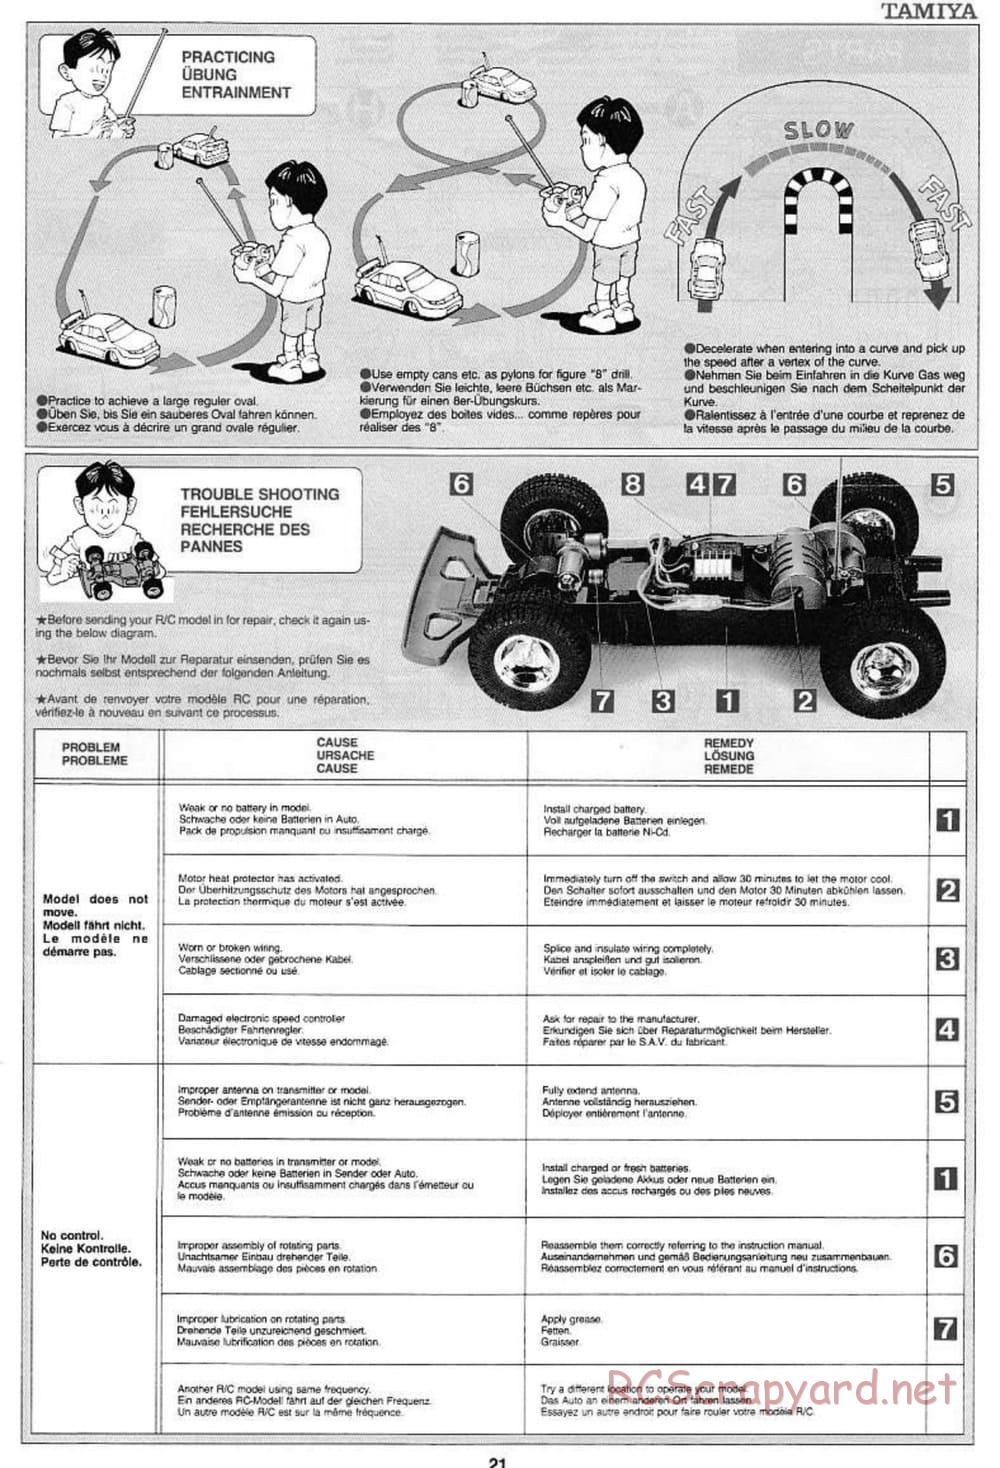 Tamiya - Wild Ceptor - Boy's 4WD Chassis - Manual - Page 21